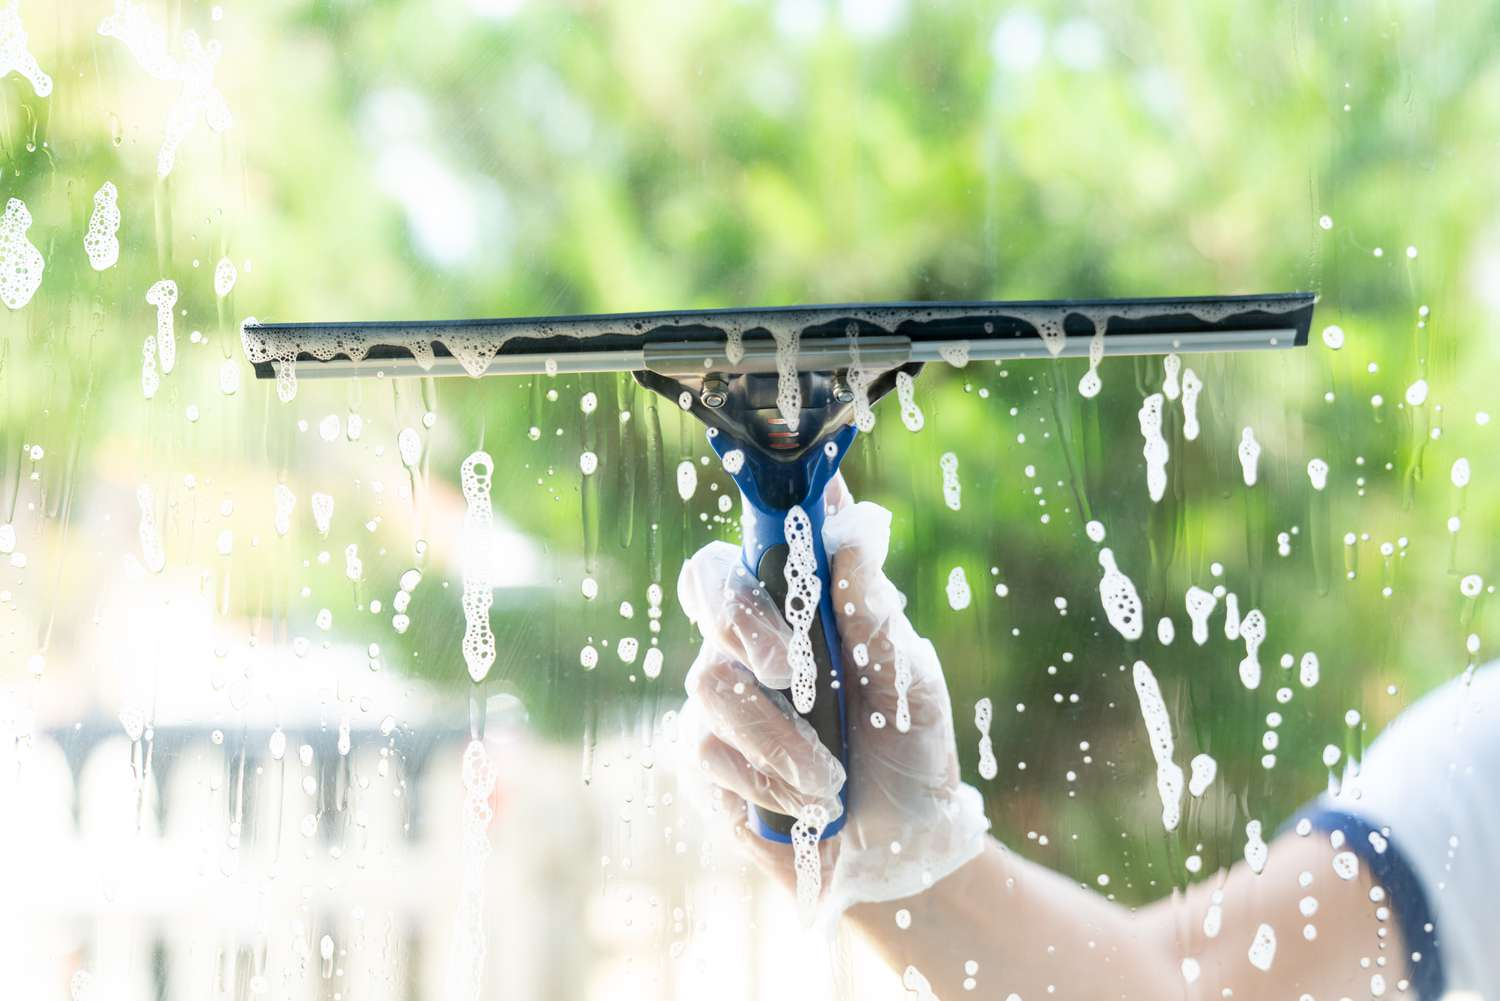 Remove any excess cleaning solution with a good-quality squeegee for a streak free shine.